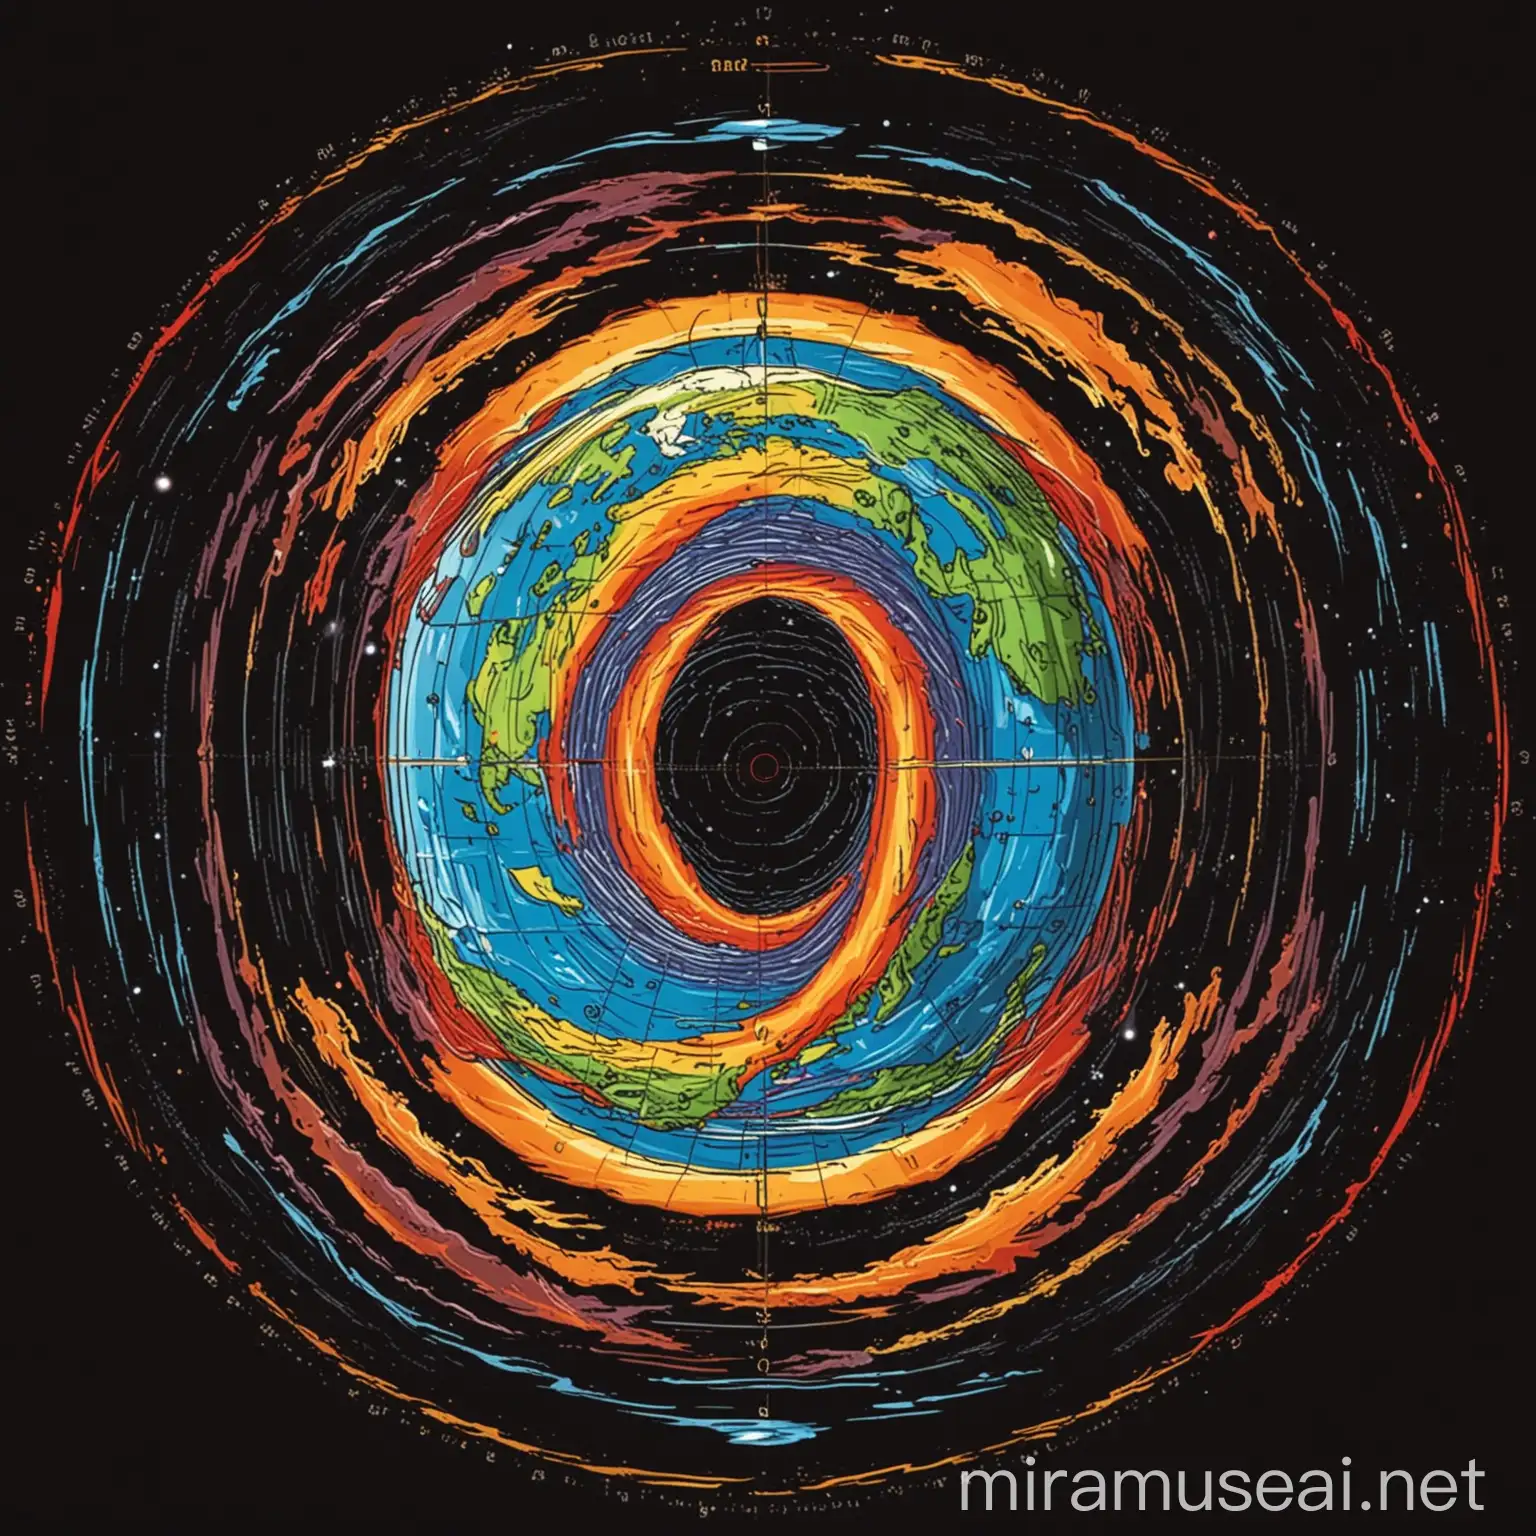 reversal of the Earth's magnetic field and rotation, vector art, colored illustration with a black outline